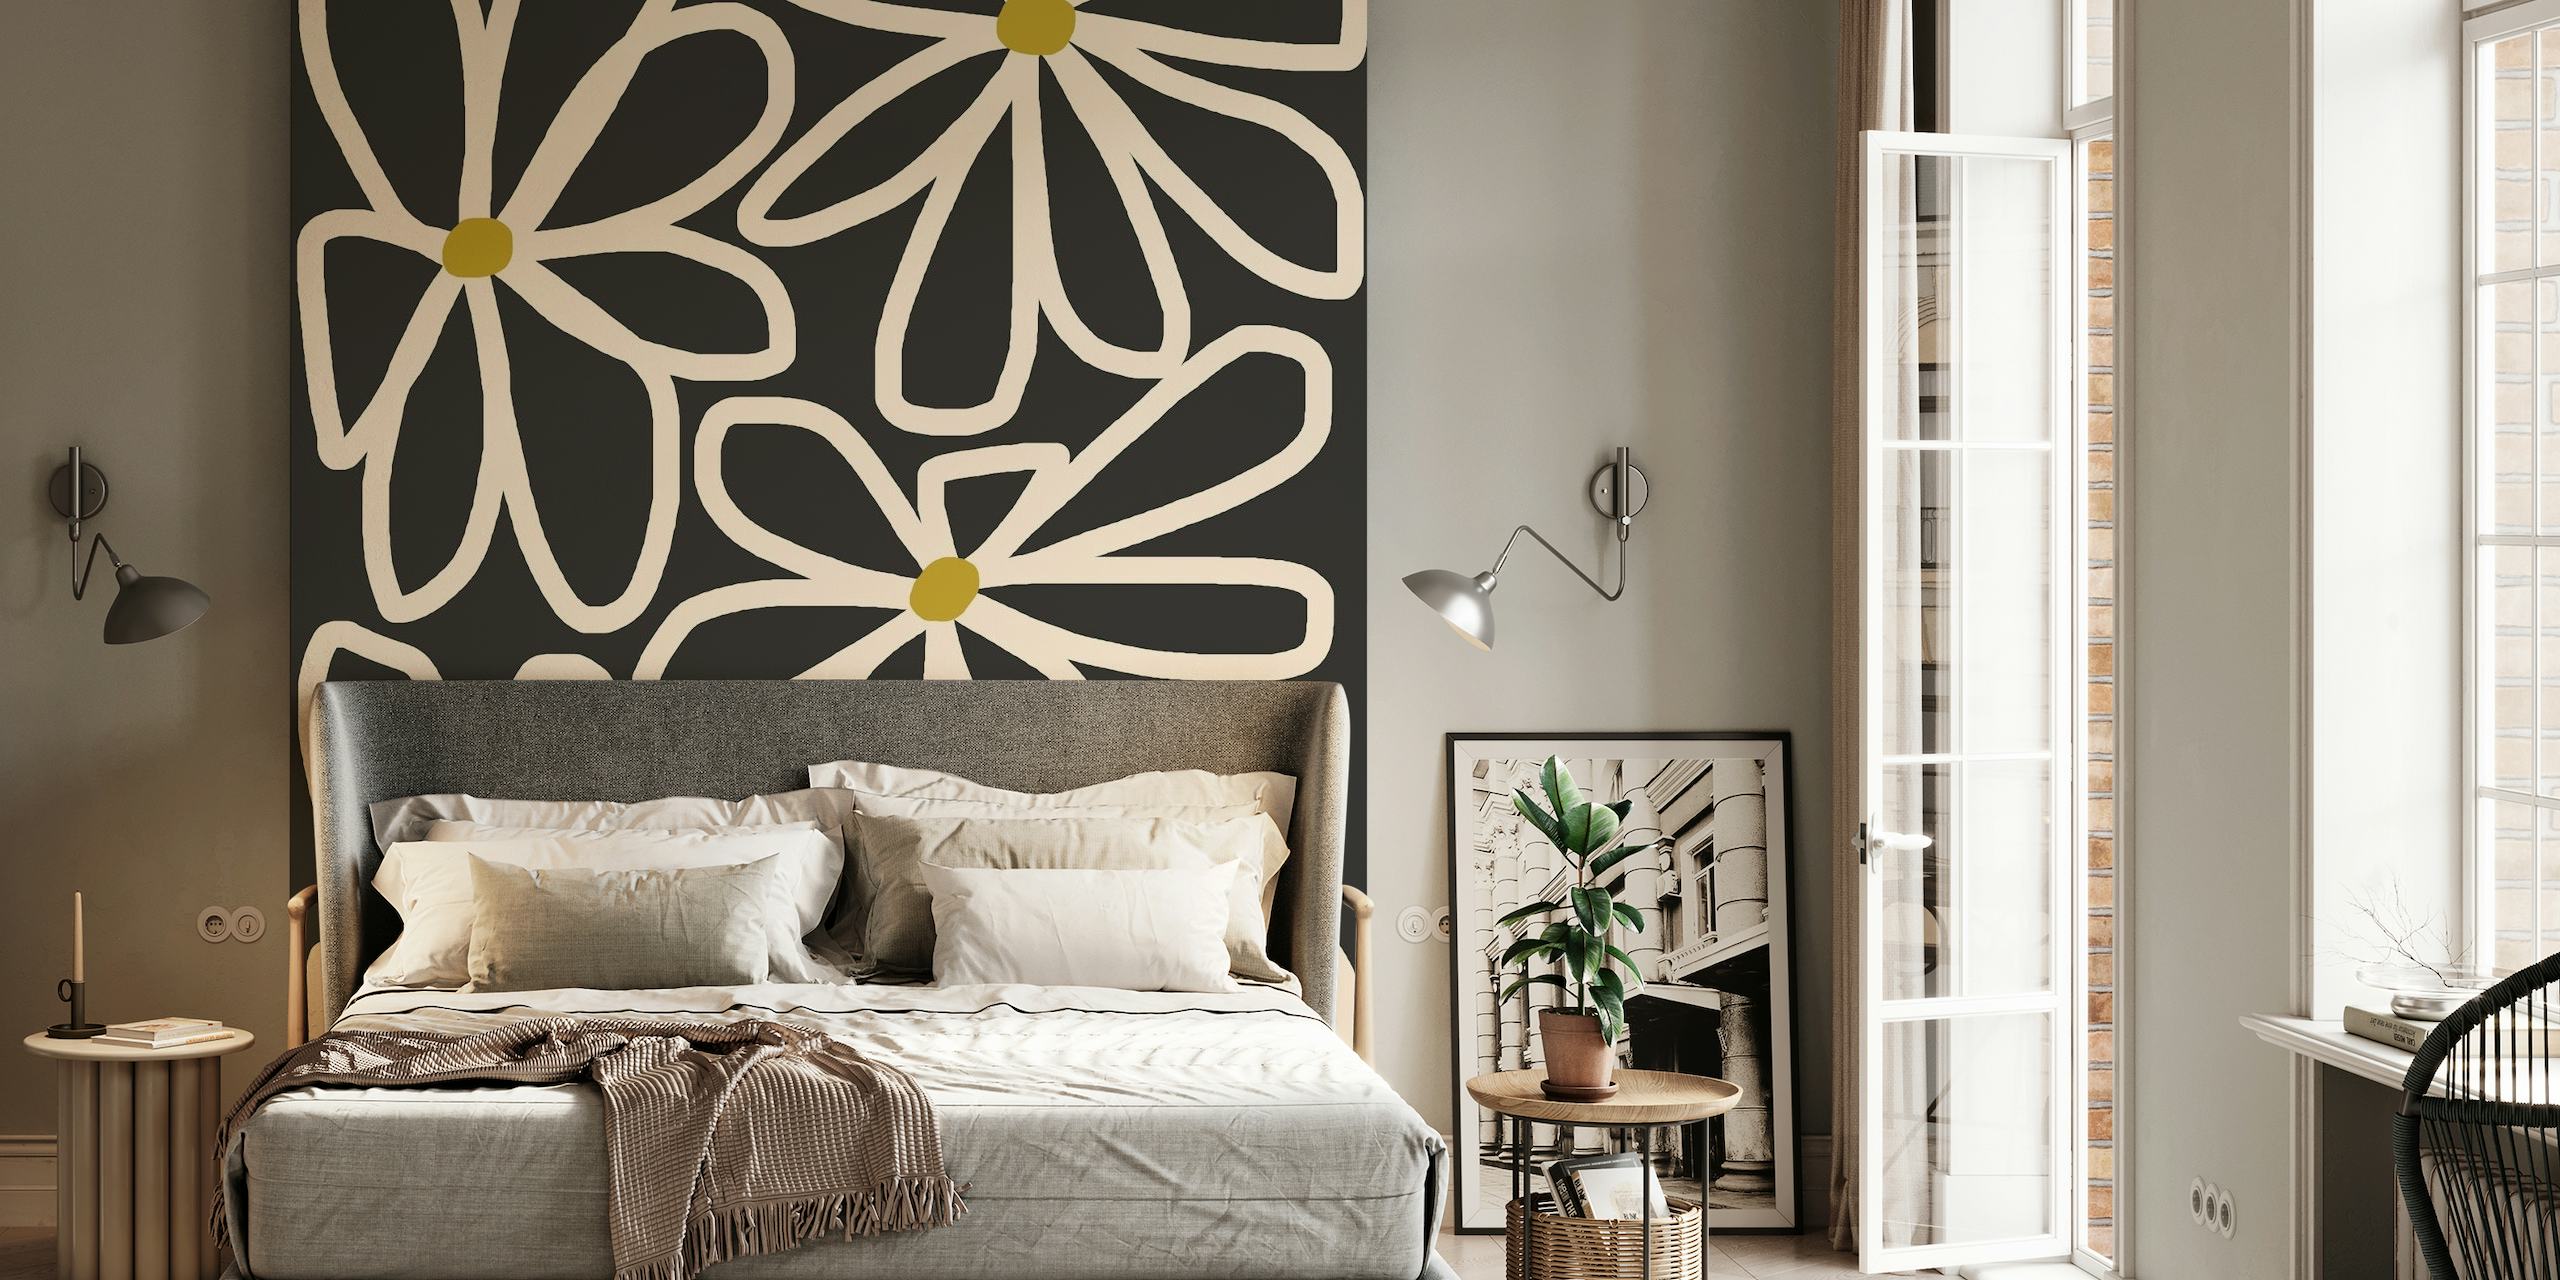 Abstract white and yellow daisies on a dark background wall mural